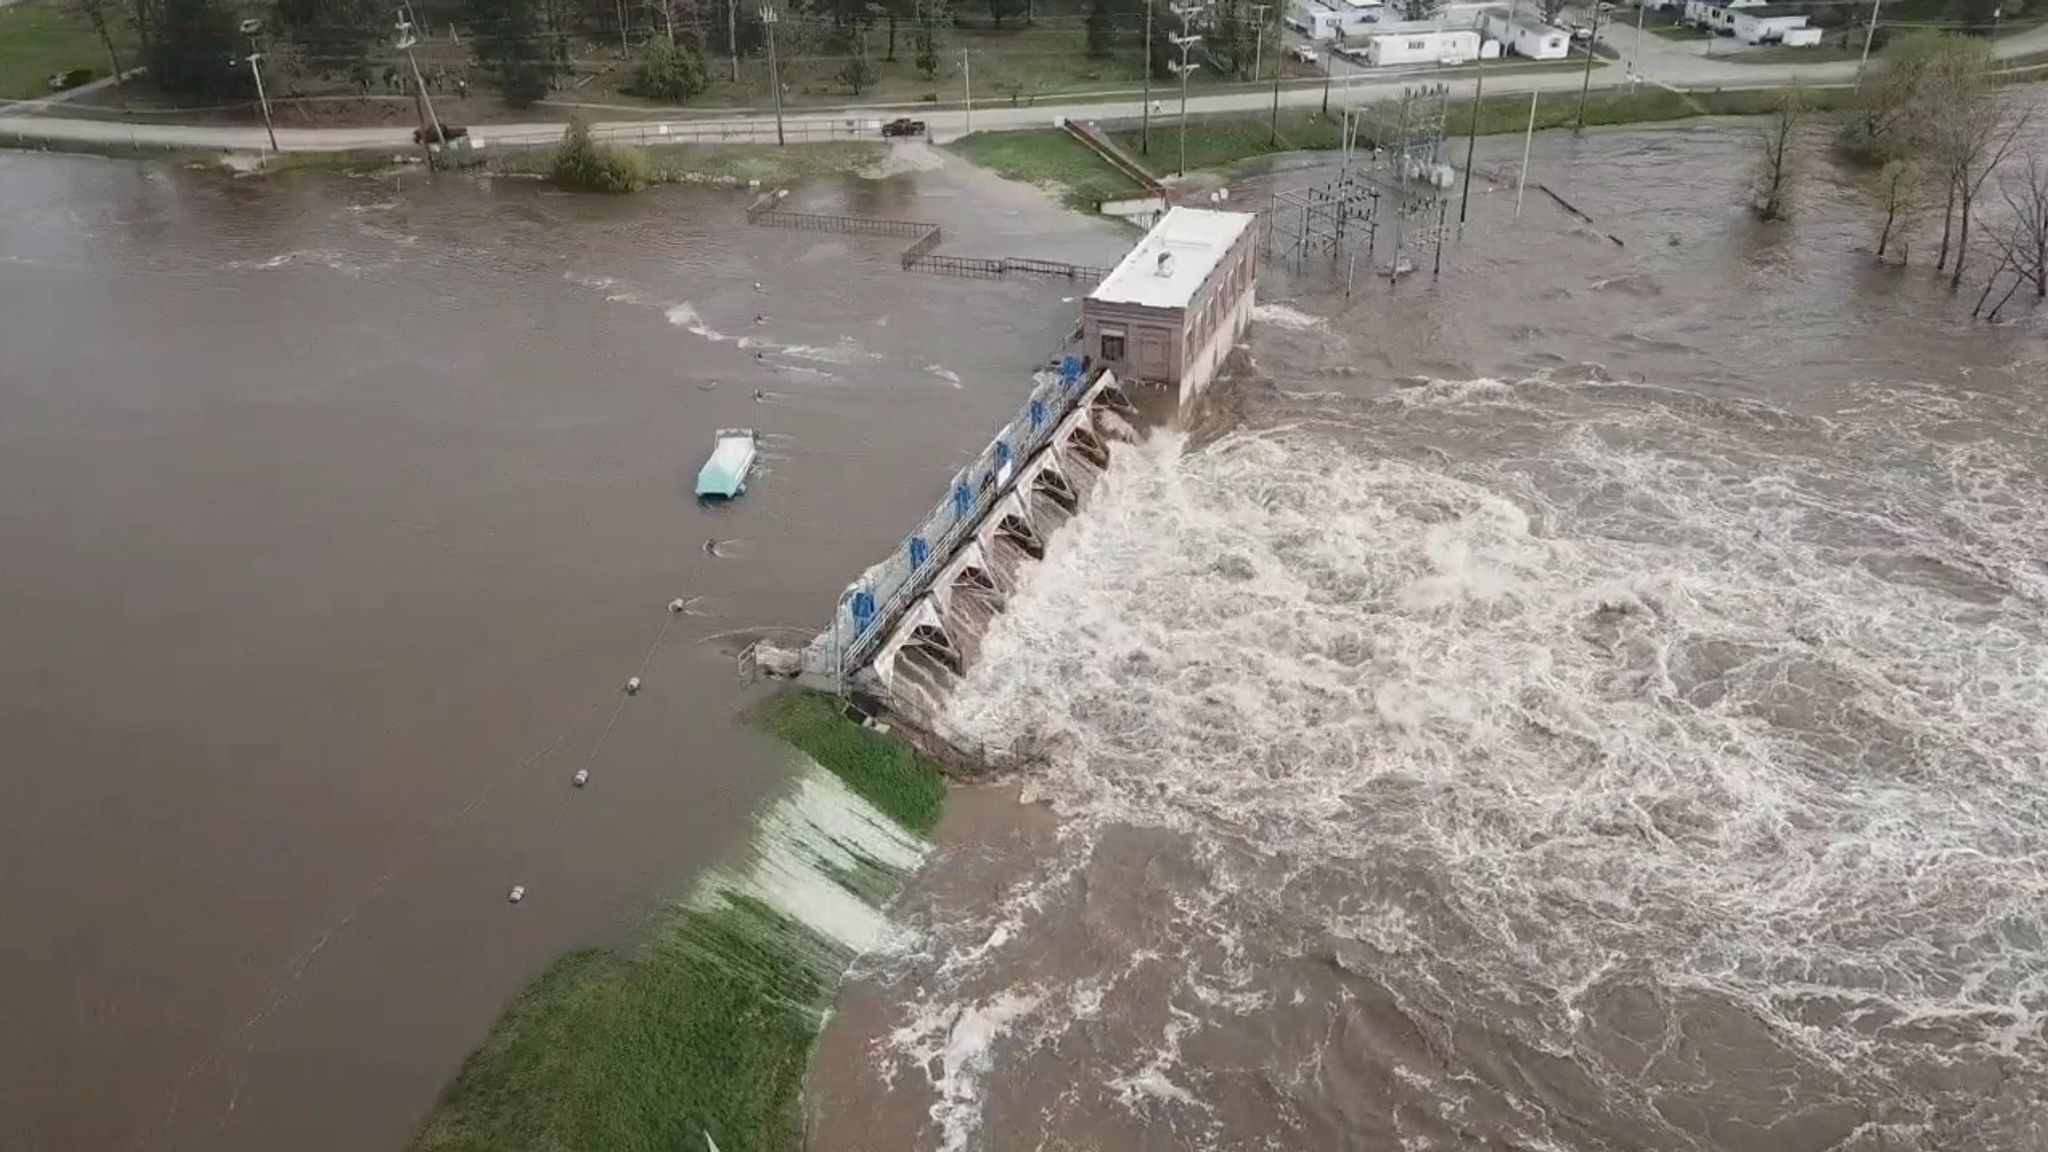 Thousands evacuated in Michigan as emergency declared after dams burst